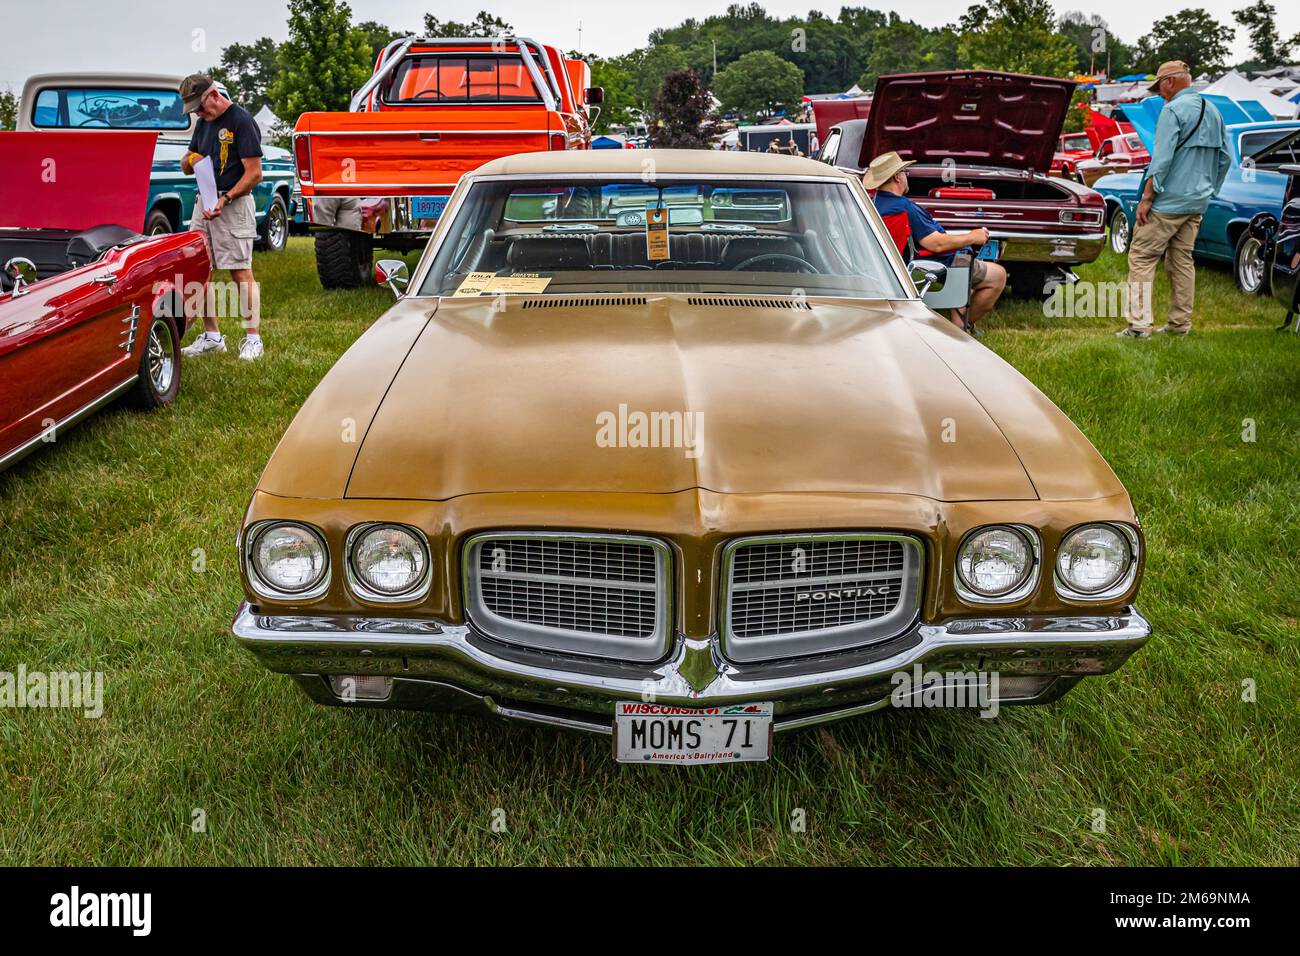 Iola, WI - July 07, 2022: High perspective front view of a 1971 Pontiac LeMans 2 Door Hardtop at a local car show. Stock Photo